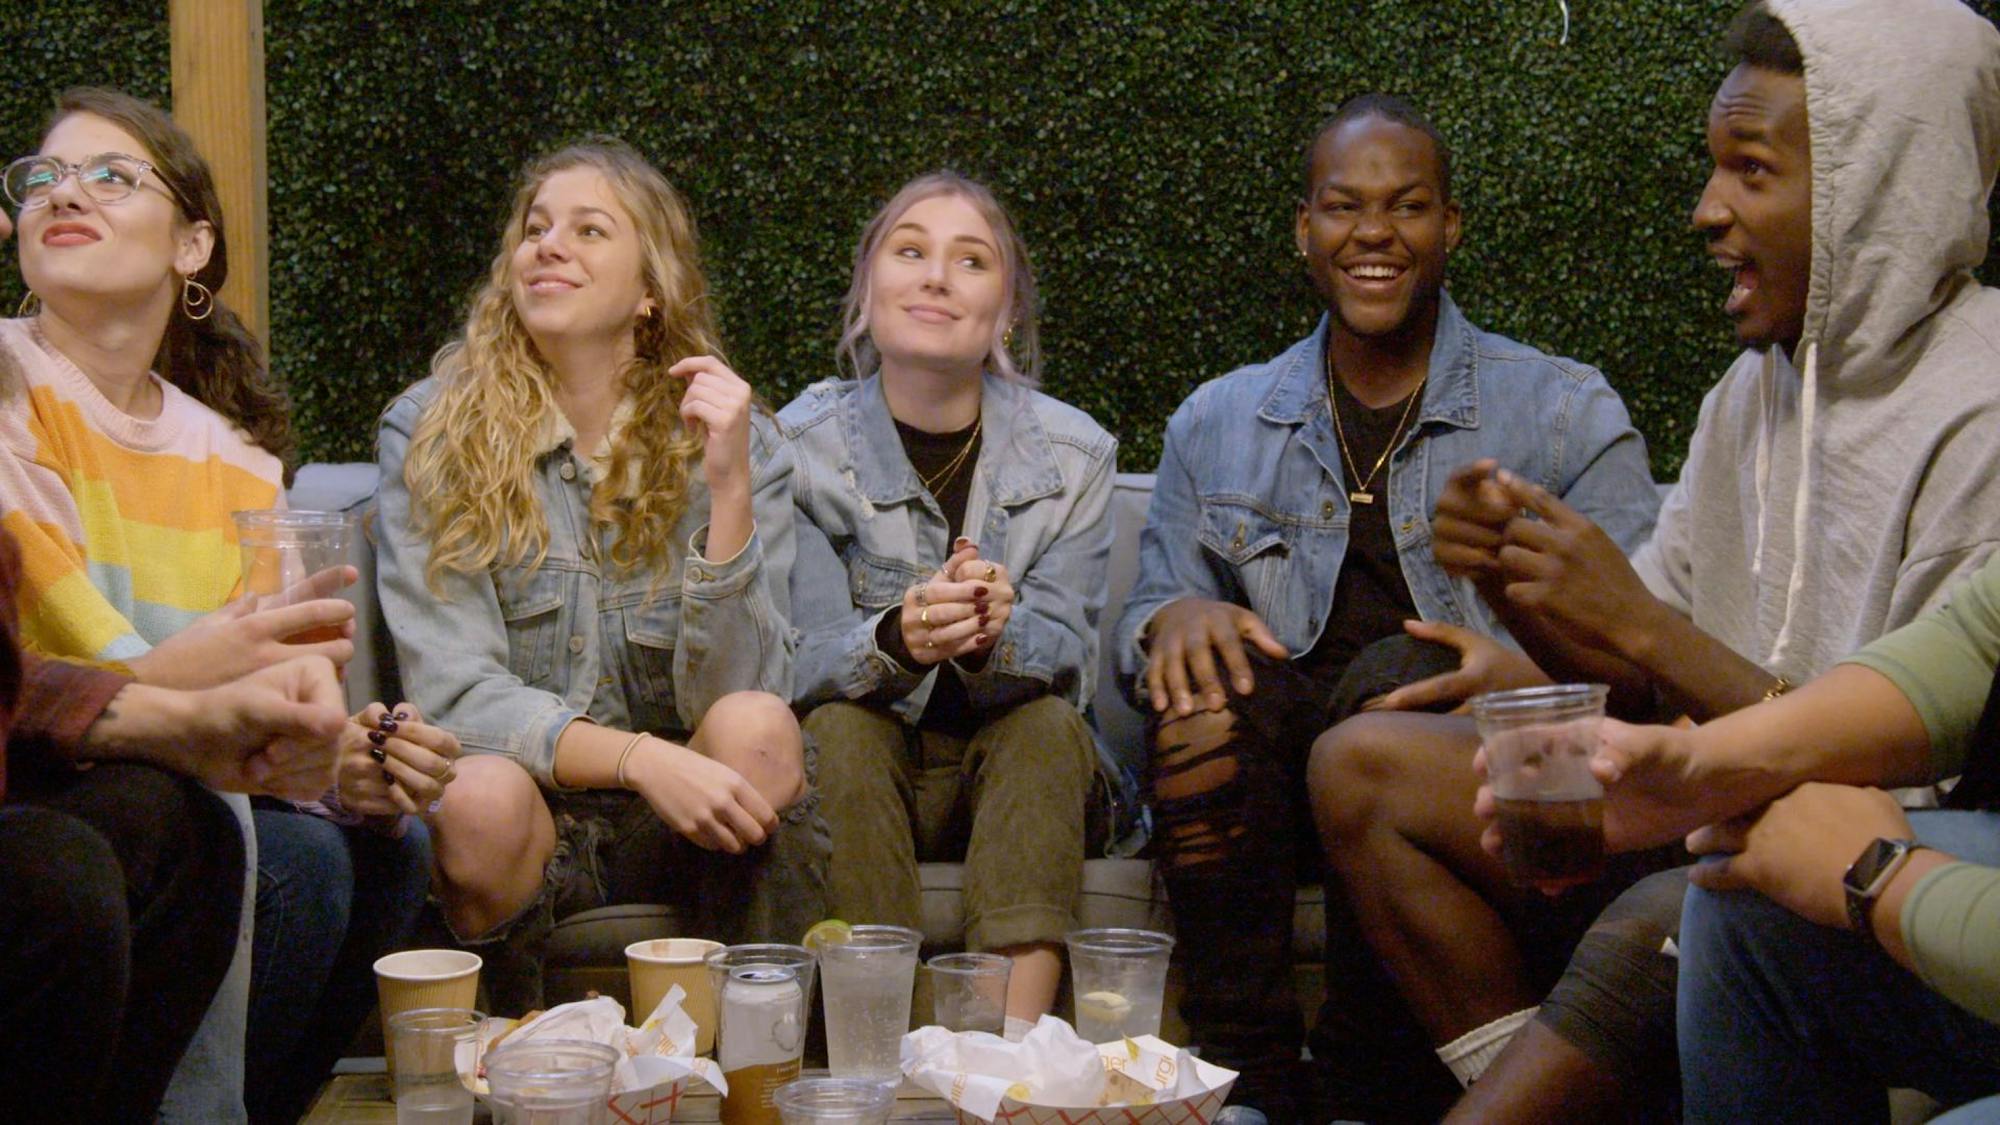 5 students sit on a couch around a table. From left to right: Renate Rose, Alexa Paulay-Simmons, Cheyenna Clearbrook, Daequan Taylor, and Rodney Burford There are coffee and water cups scattered in front of them, as well as containers of fries. Rose wears a striped sweater, Paulay-Simmons, Clearbrook, and Taylor wear jean jackets, and Burford wears a greya hoodie. Taylor is laughing at something Burford is saying, and Paulay-Simmons and Rose are looking off camera. The scene is lighthearted and fun!